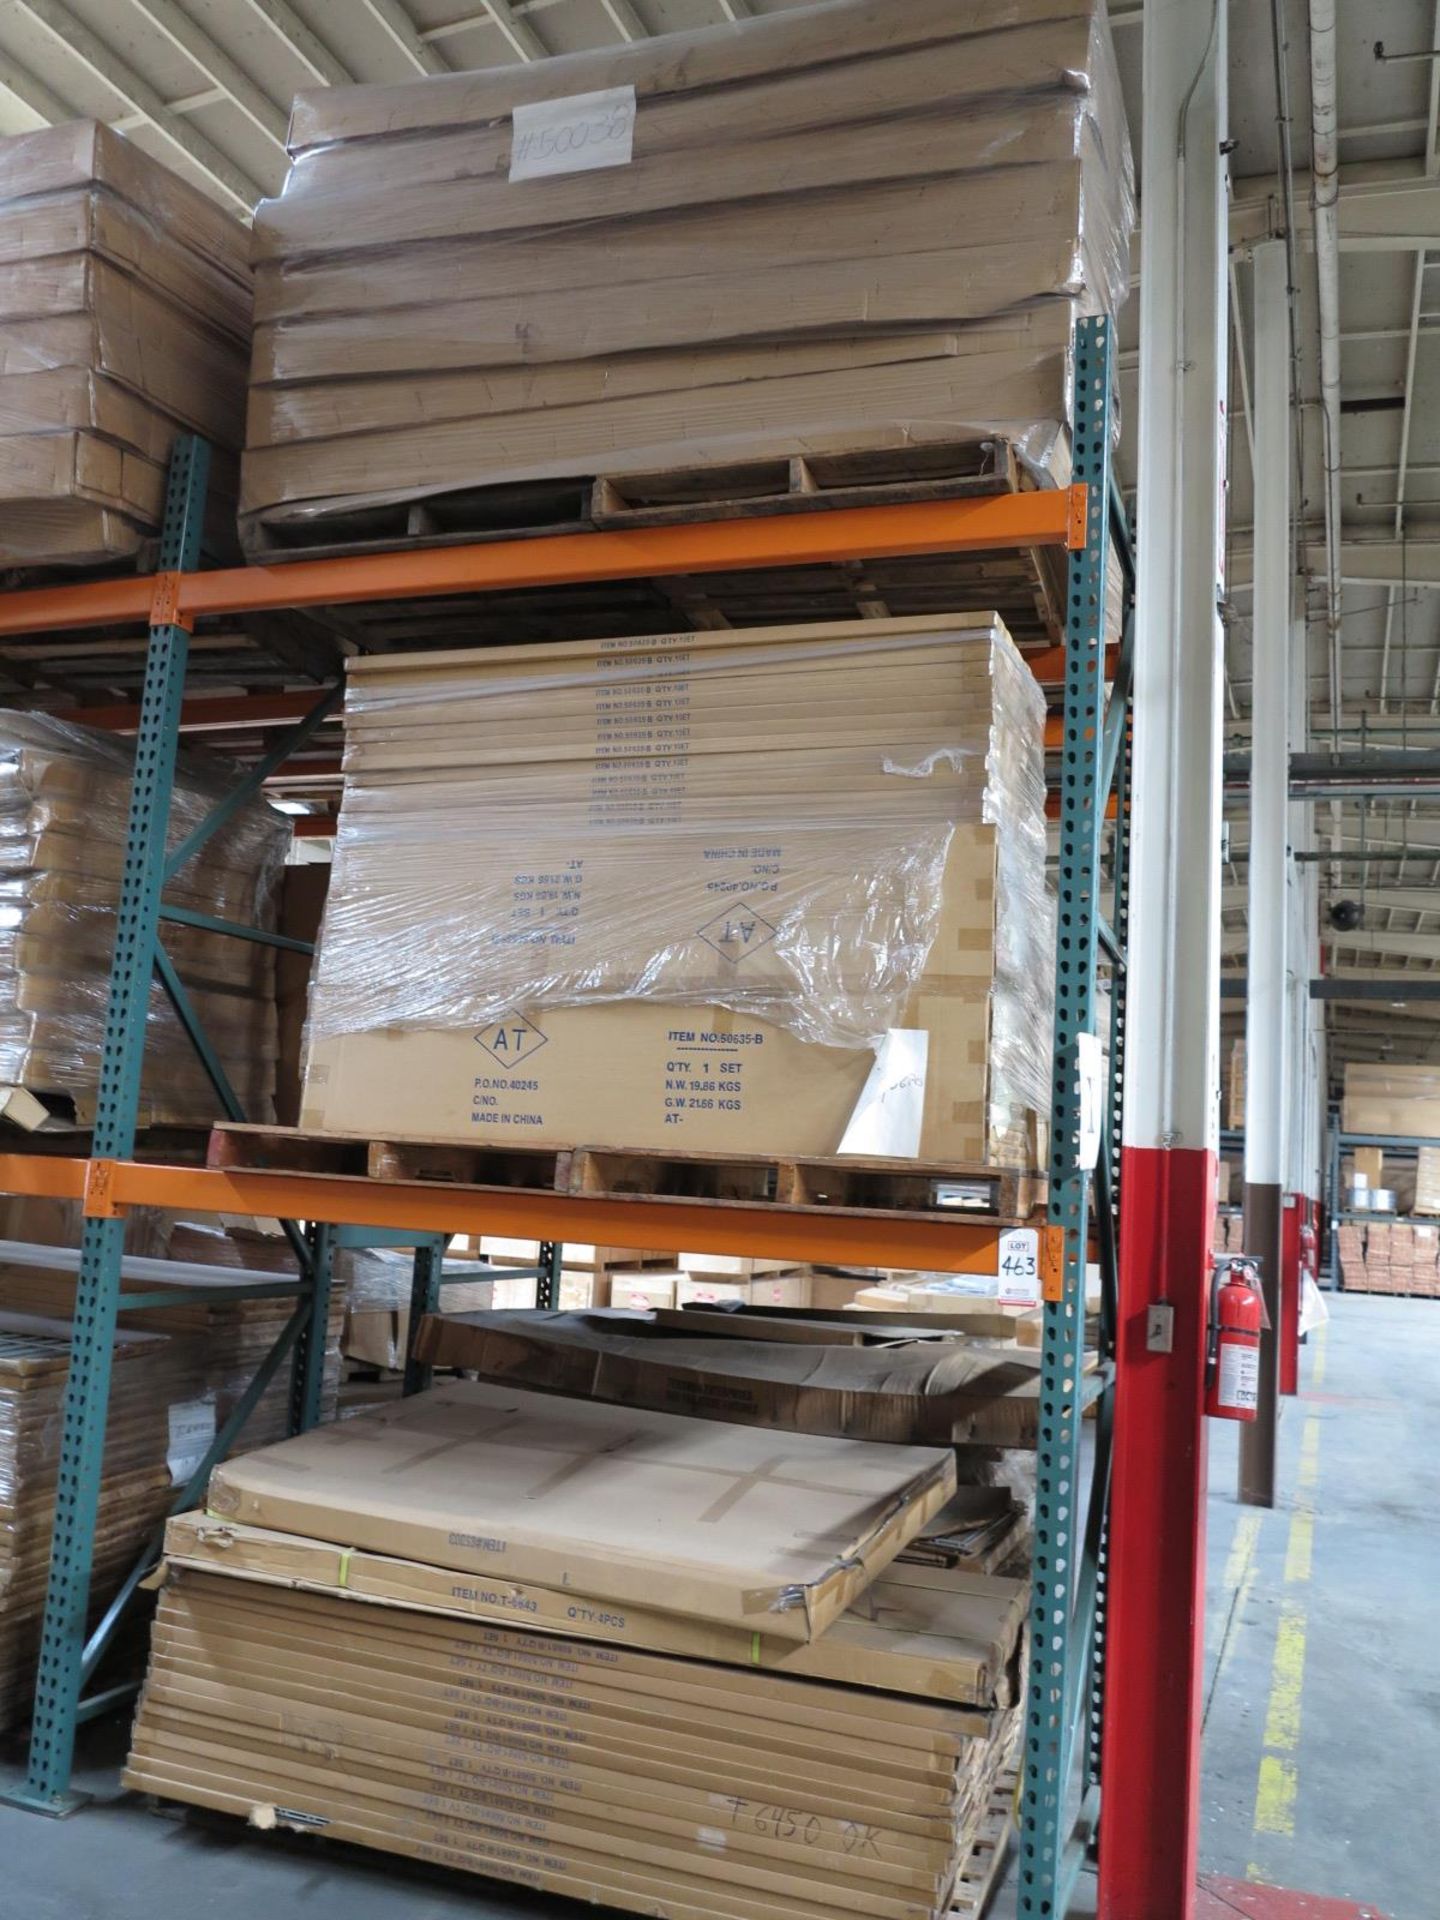 LOT - CONTENTS OF (2) SECTIONS OF PALLET RACK TO INCLUDE: ITEM # 50635, 5' STARTER SET 72" HIGH F